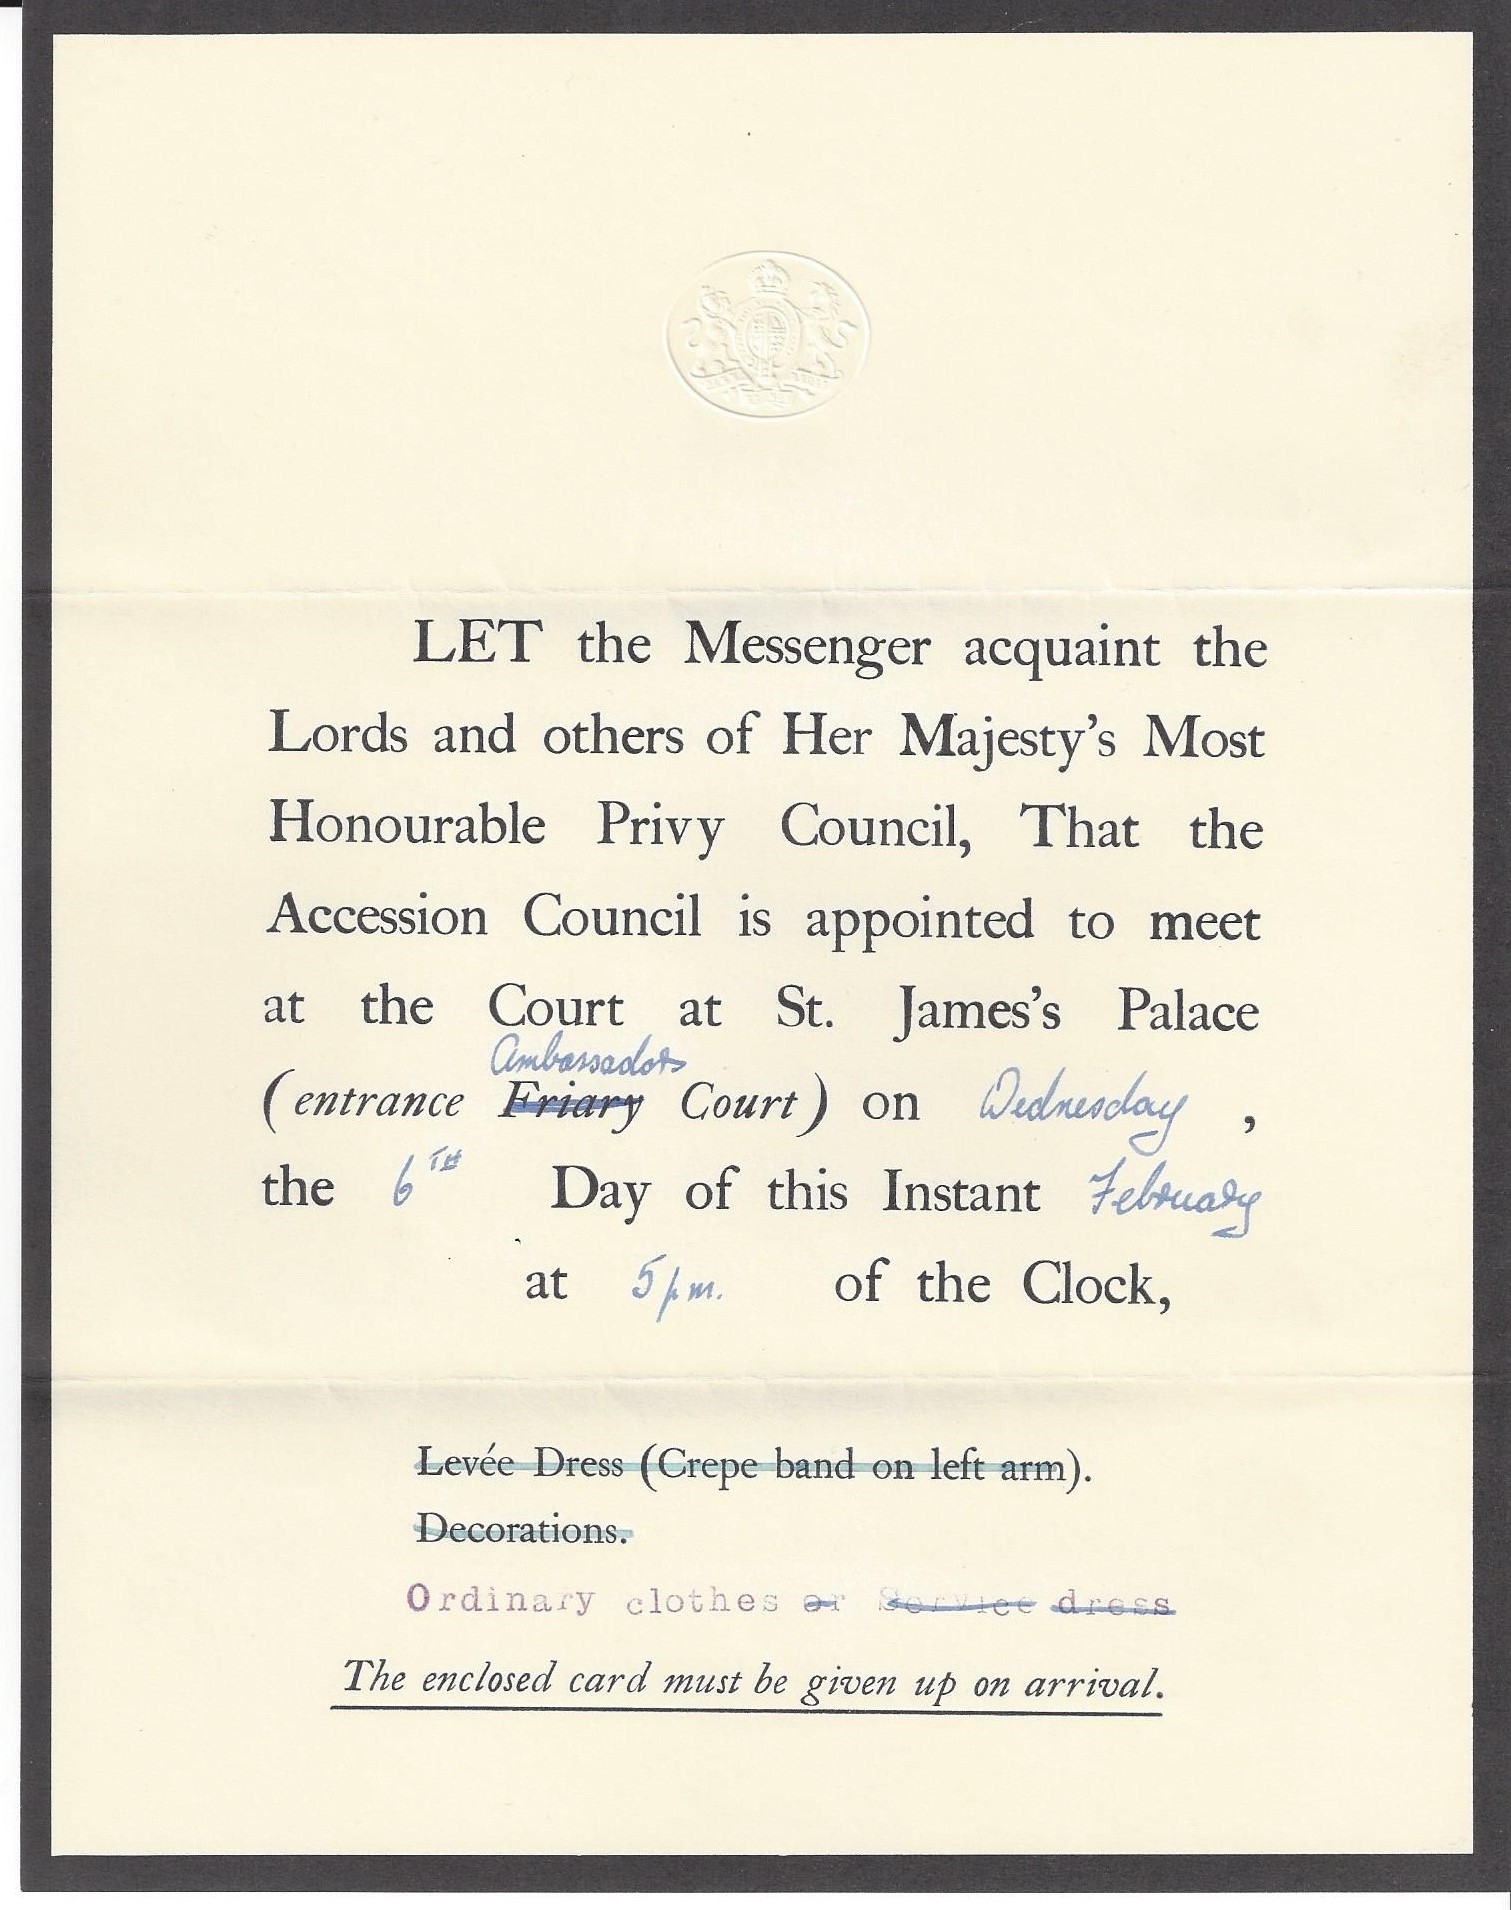 Lord Normand First Accession Council Letter